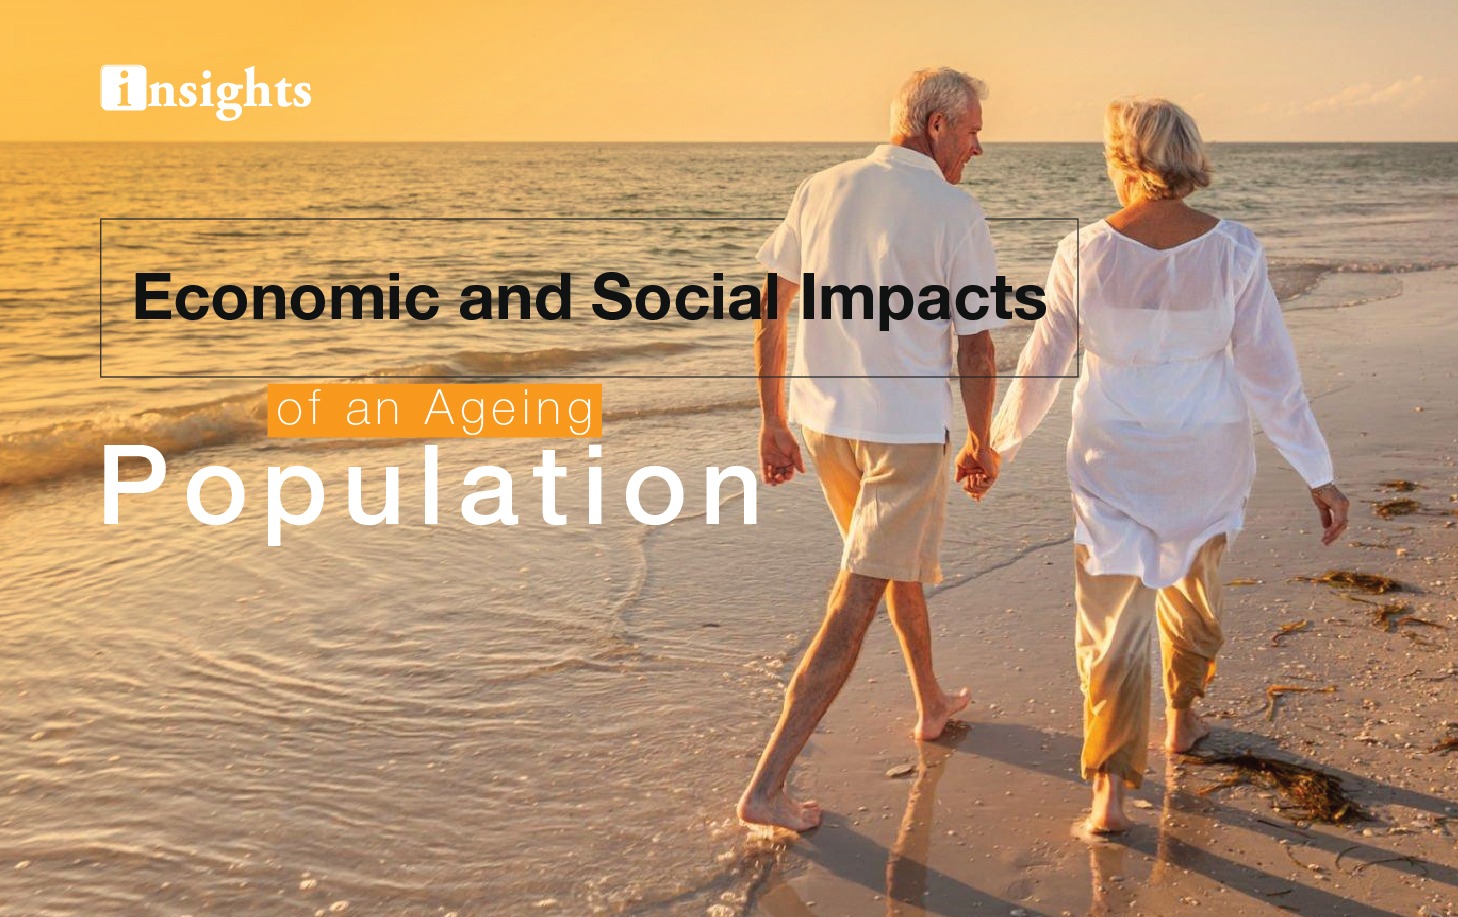 Economic and Social Impacts of an Ageing Population